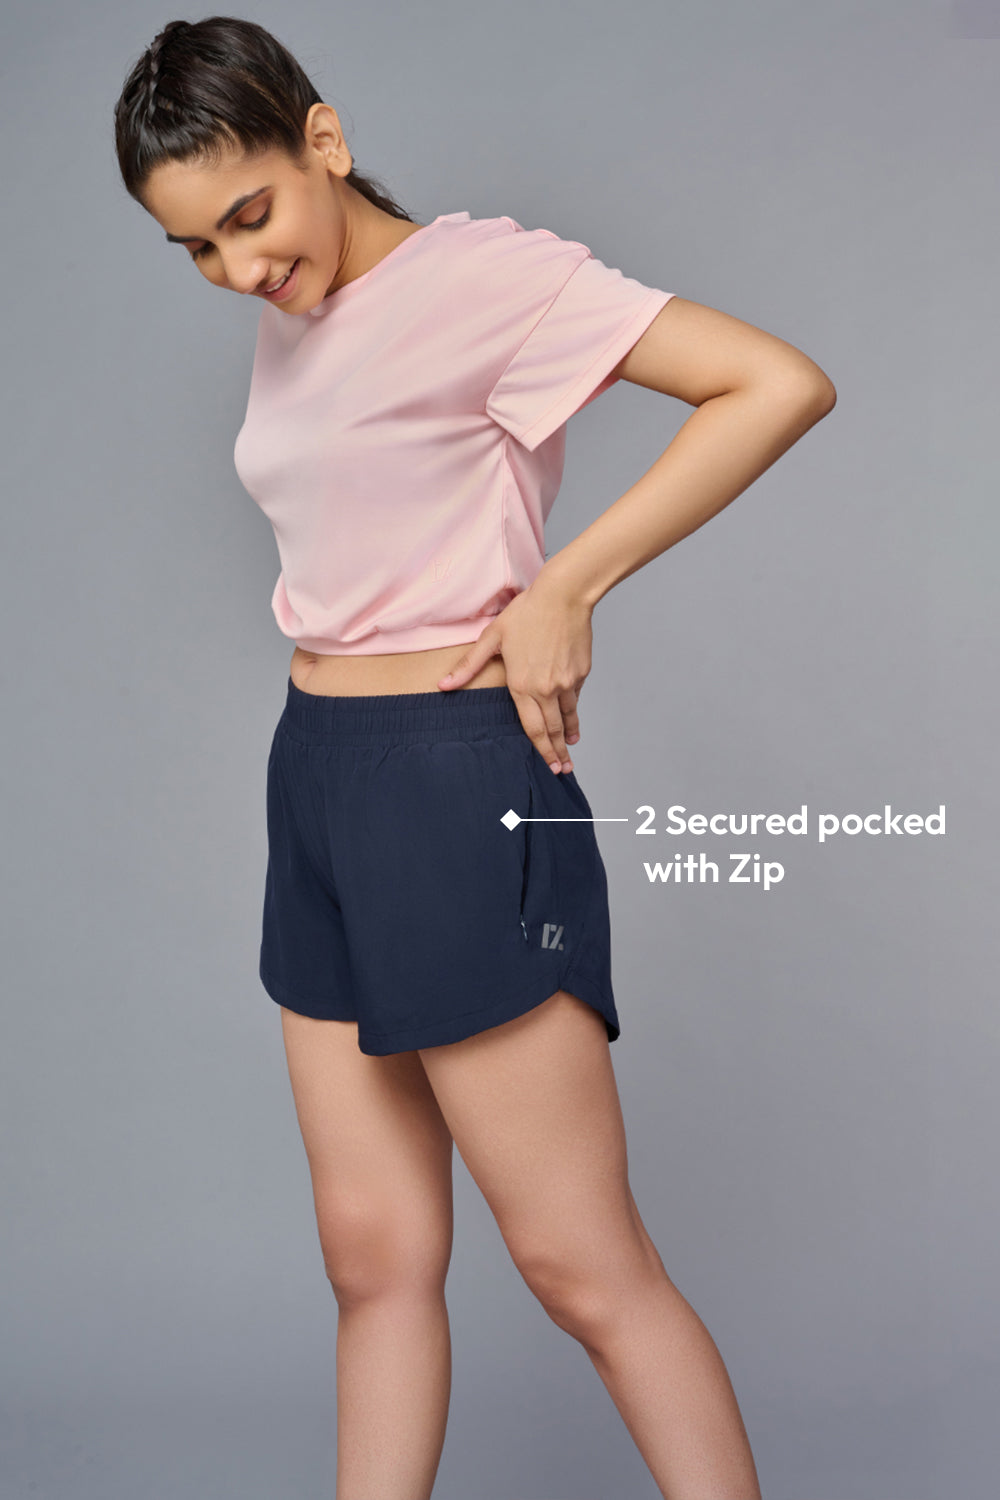 CORE Comfy Gym Shorts with Secured Pockets (NB)